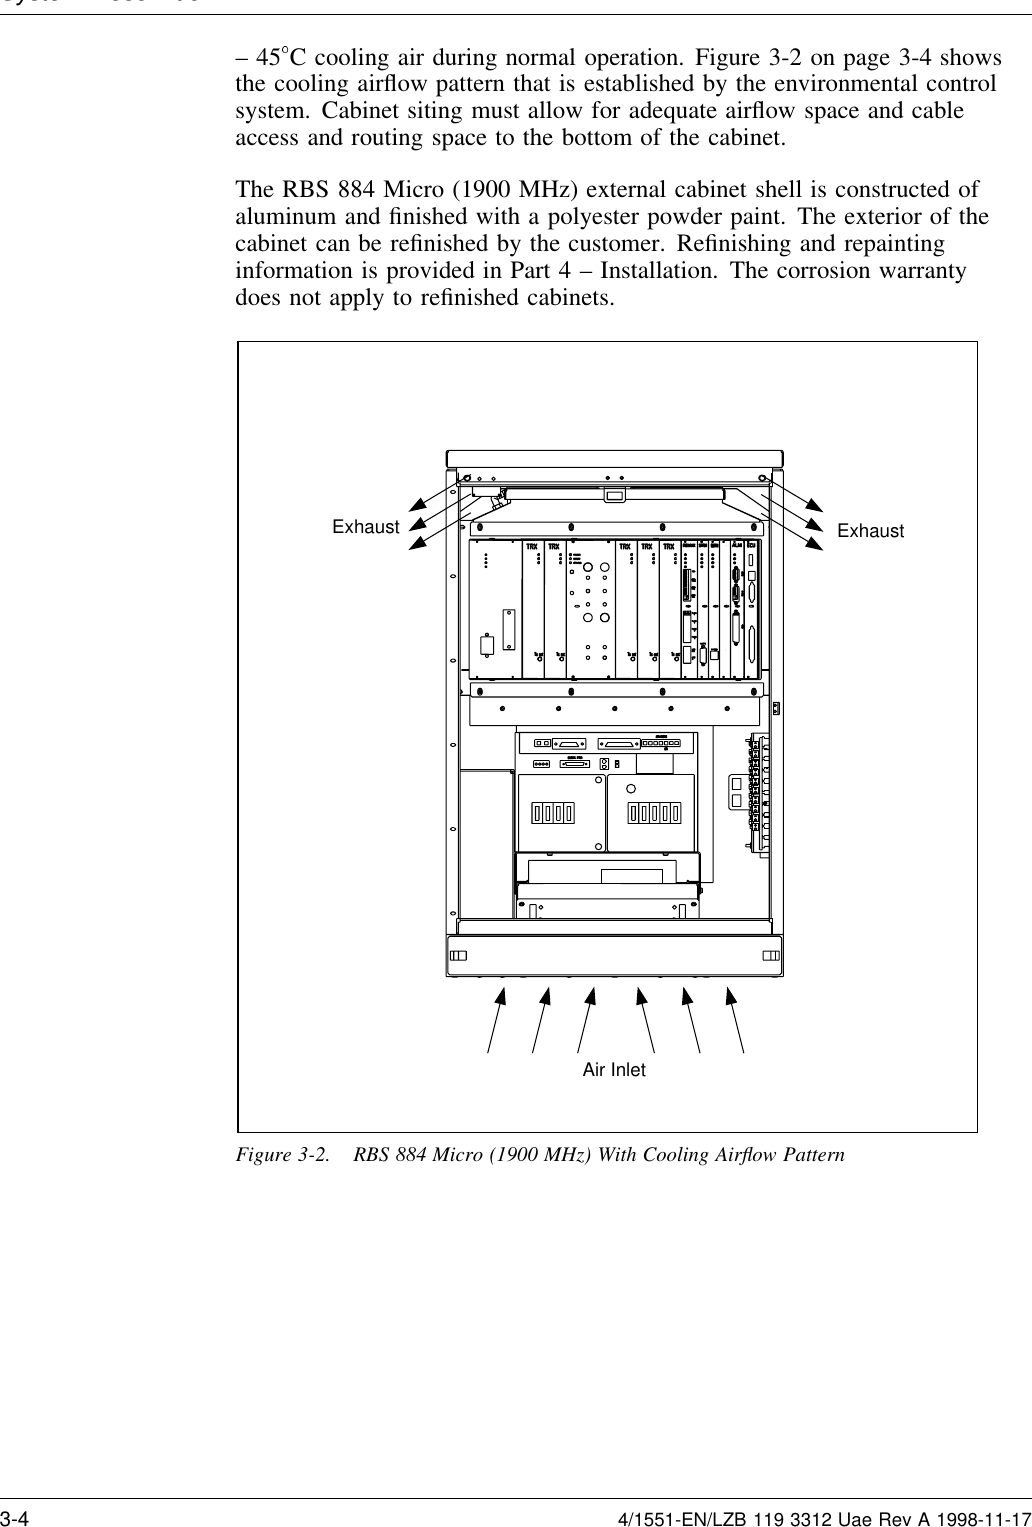 System Descri tion–45C cooling air during normal operation. Figure 3-2 on page 3-4 showsthe cooling airﬂow pattern that is established by the environmental controlsystem. Cabinet siting must allow for adequate airﬂow space and cableaccess and routing space to the bottom of the cabinet.The RBS 884 Micro (1900 MHz) external cabinet shell is constructed ofaluminum and ﬁnished with a polyester powder paint. The exterior of thecabinet can be reﬁnished by the customer. Reﬁnishing and repaintinginformation is provided in Part 4 – Installation. The corrosion warrantydoes not apply to reﬁnished cabinets.Air InletExhaust ExhaustFigure 3-2. RBS 884 Micro (1900 MHz) With Cooling Airﬂow Pattern3-4 4/1551-EN/LZB 119 3312 Uae Rev A 1998-11-17